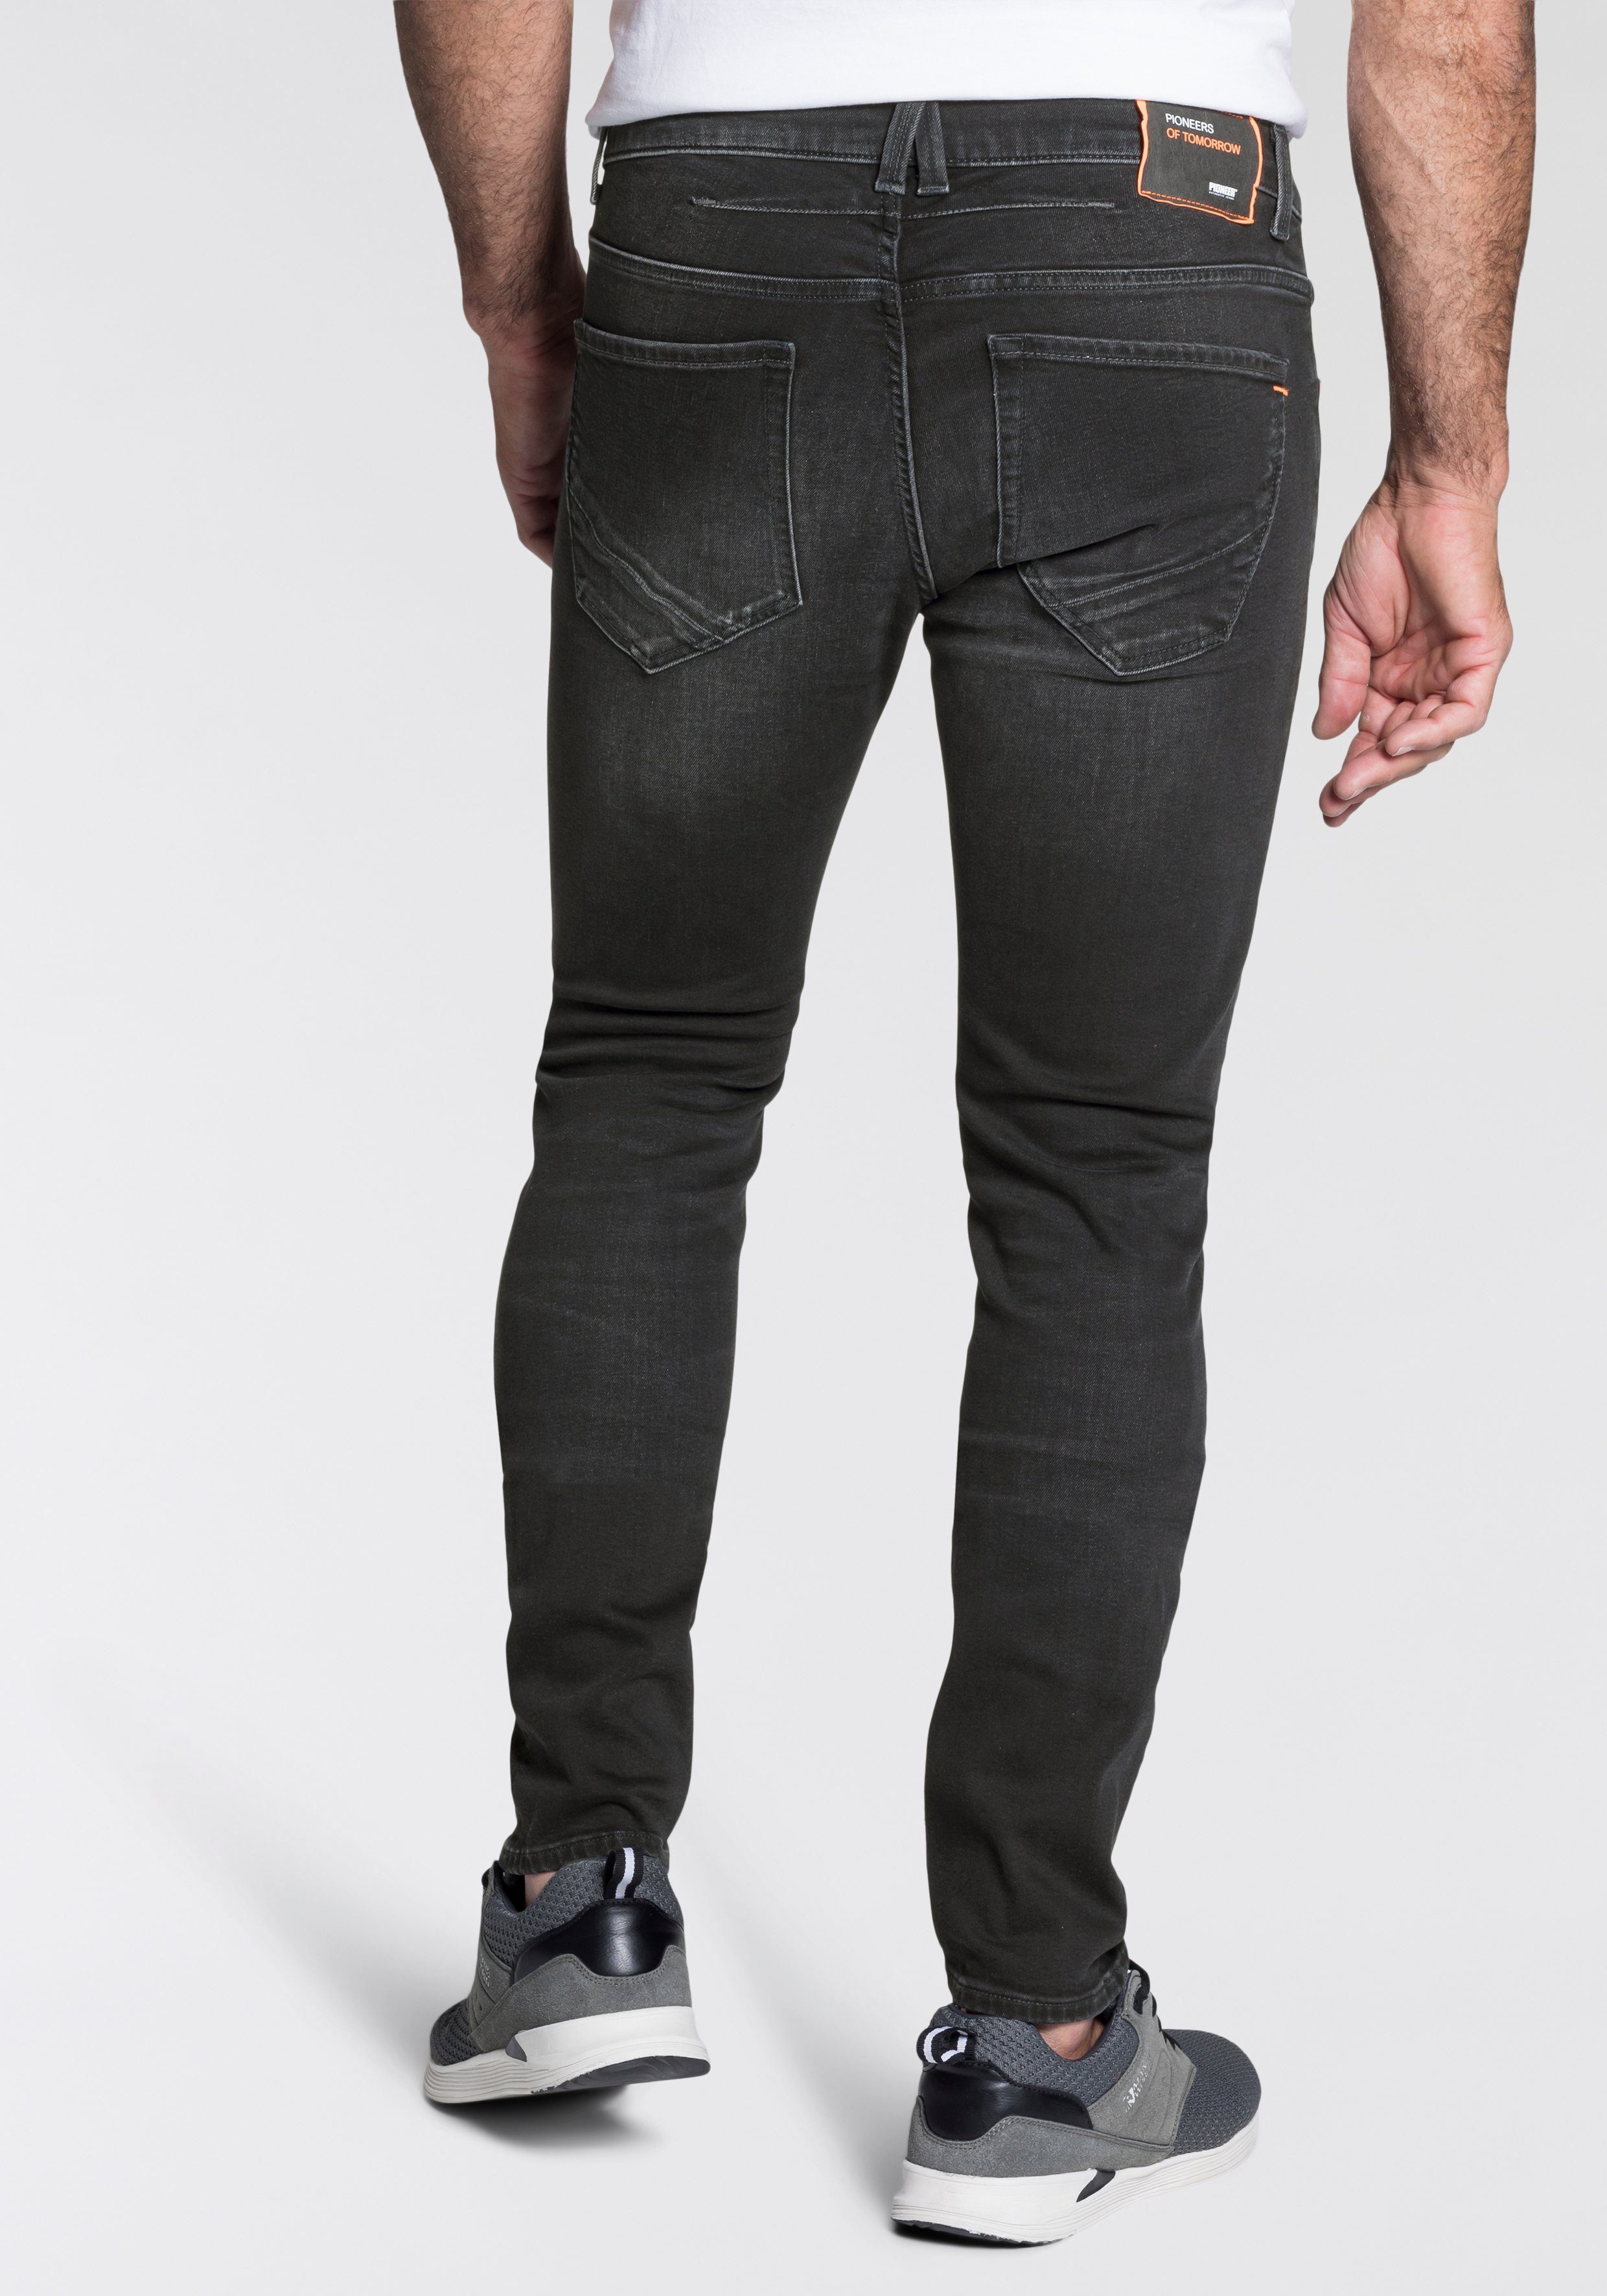 Pioneer Authentic Jeans Slim-fit-Jeans Ethan grey fashion dark